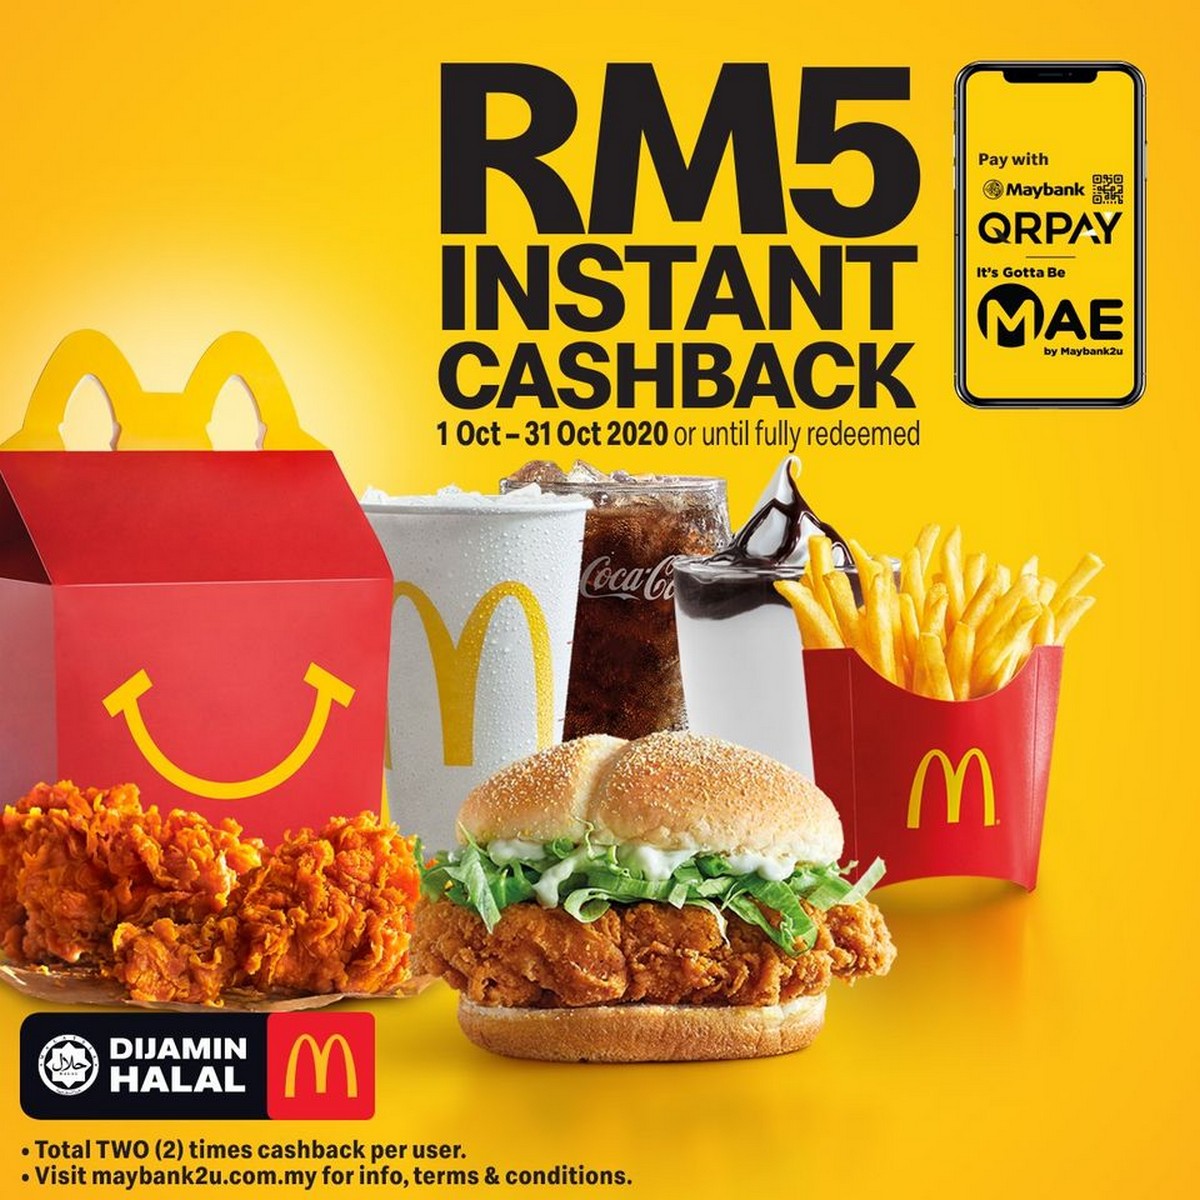 i.-Use-Maybank-QRPay-or-MAE-e-wallet-payment-at-McDonalds-to-get-up-to-RM10-cash-rebate - News 